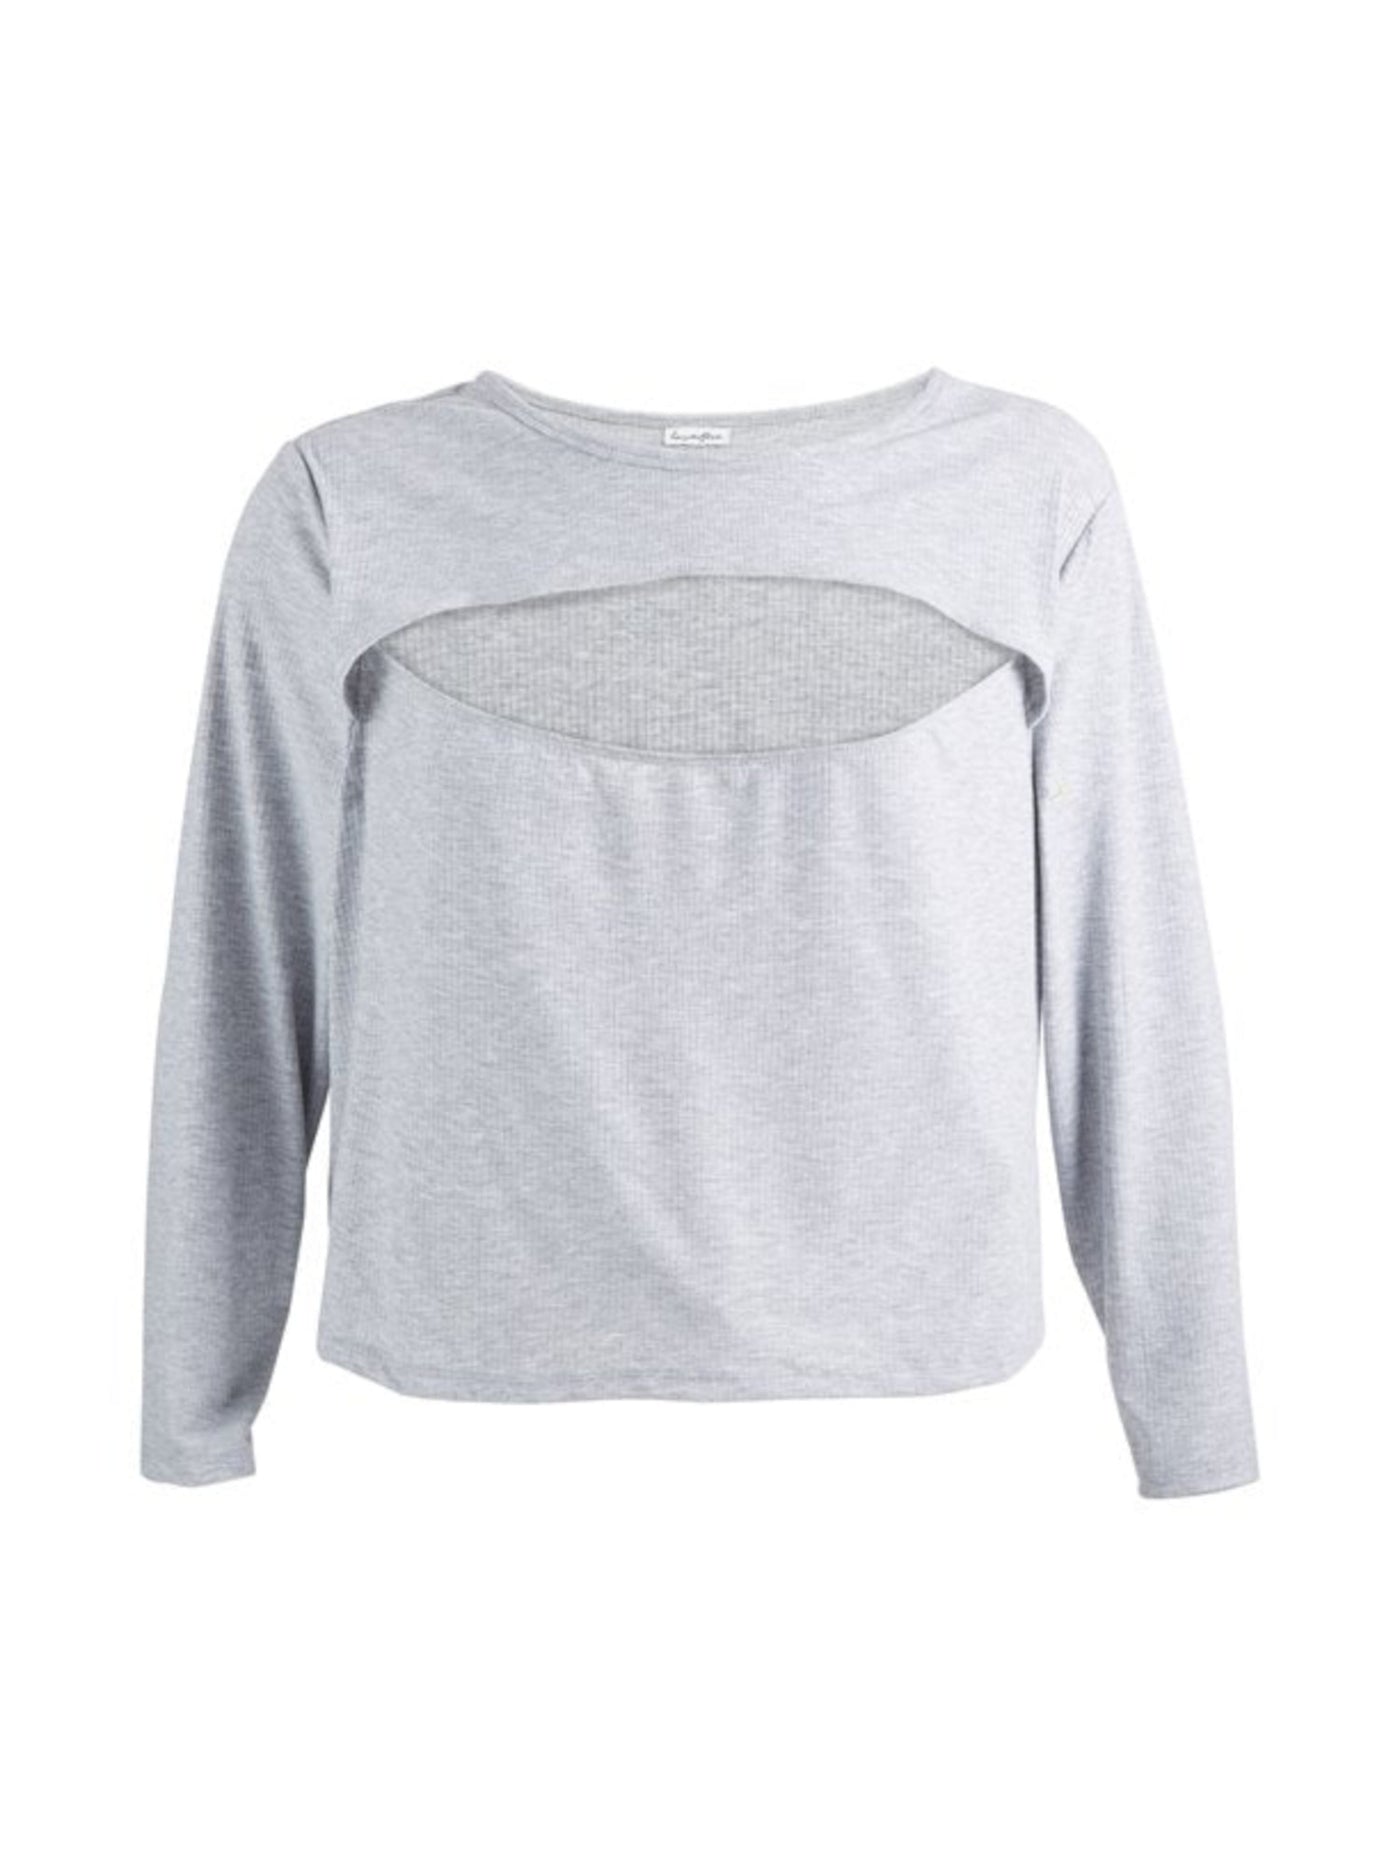 LOVE FIRE Womens Gray Ribbed Cut Out Heather Long Sleeve Crew Neck Top Plus 2X